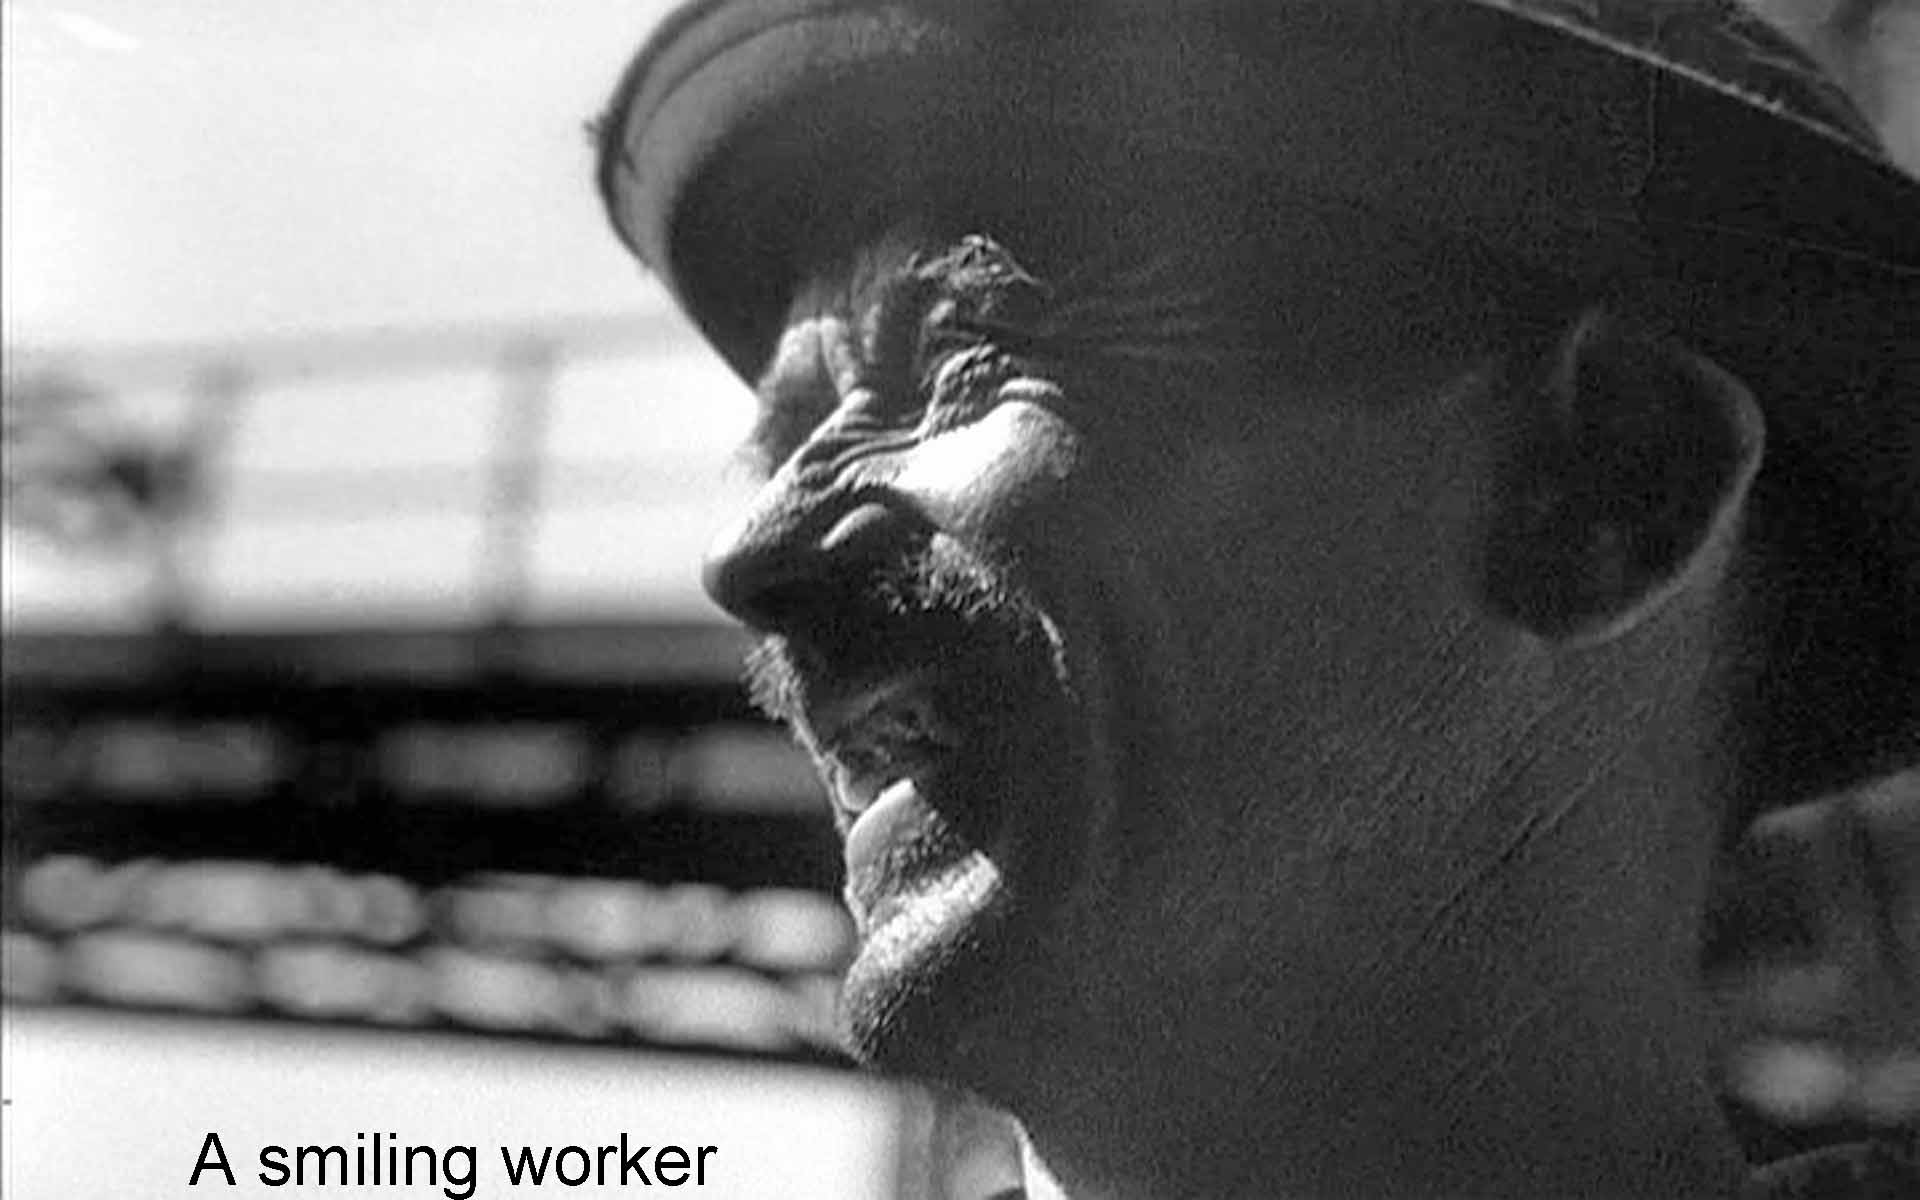 A smiling worker